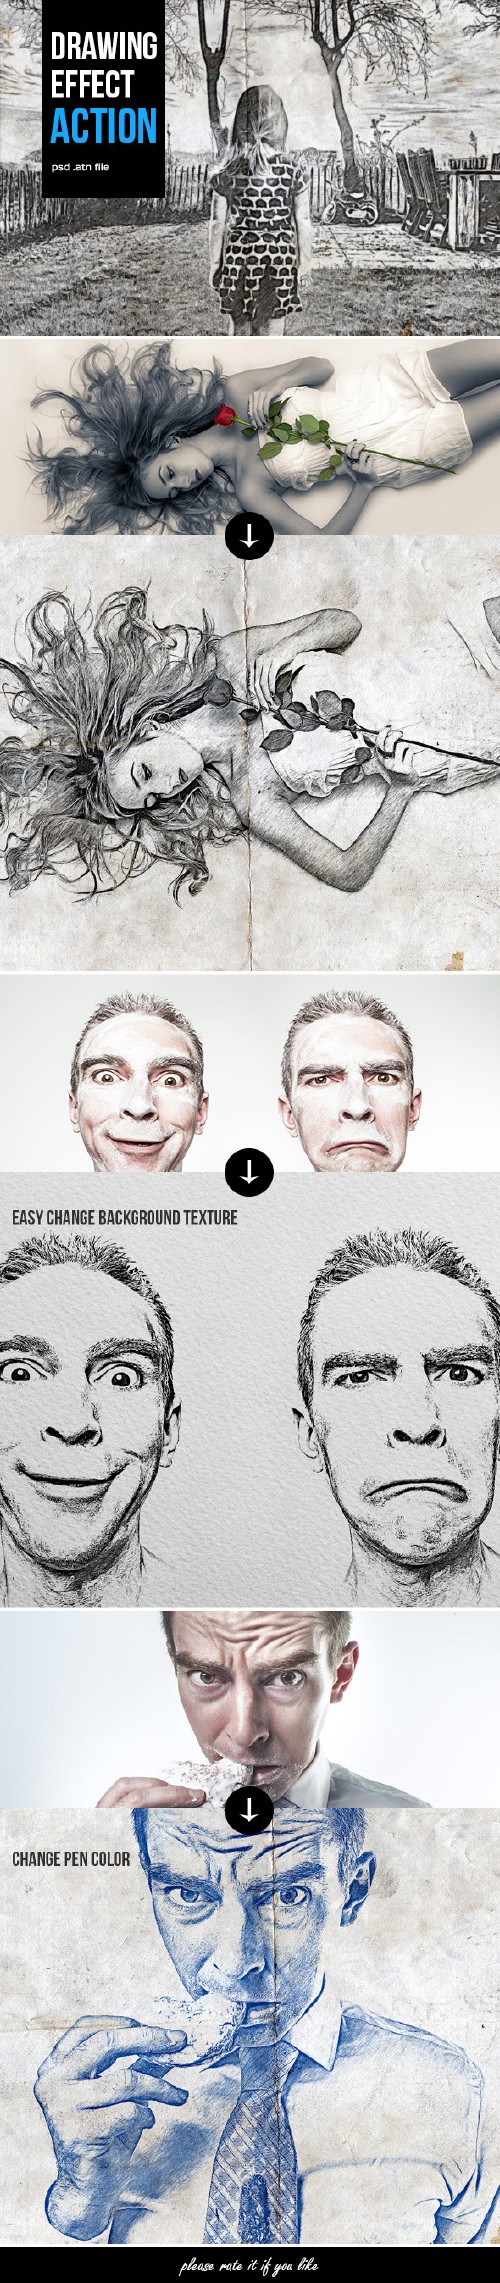 GraphicRiver - Drawing Action 10035660